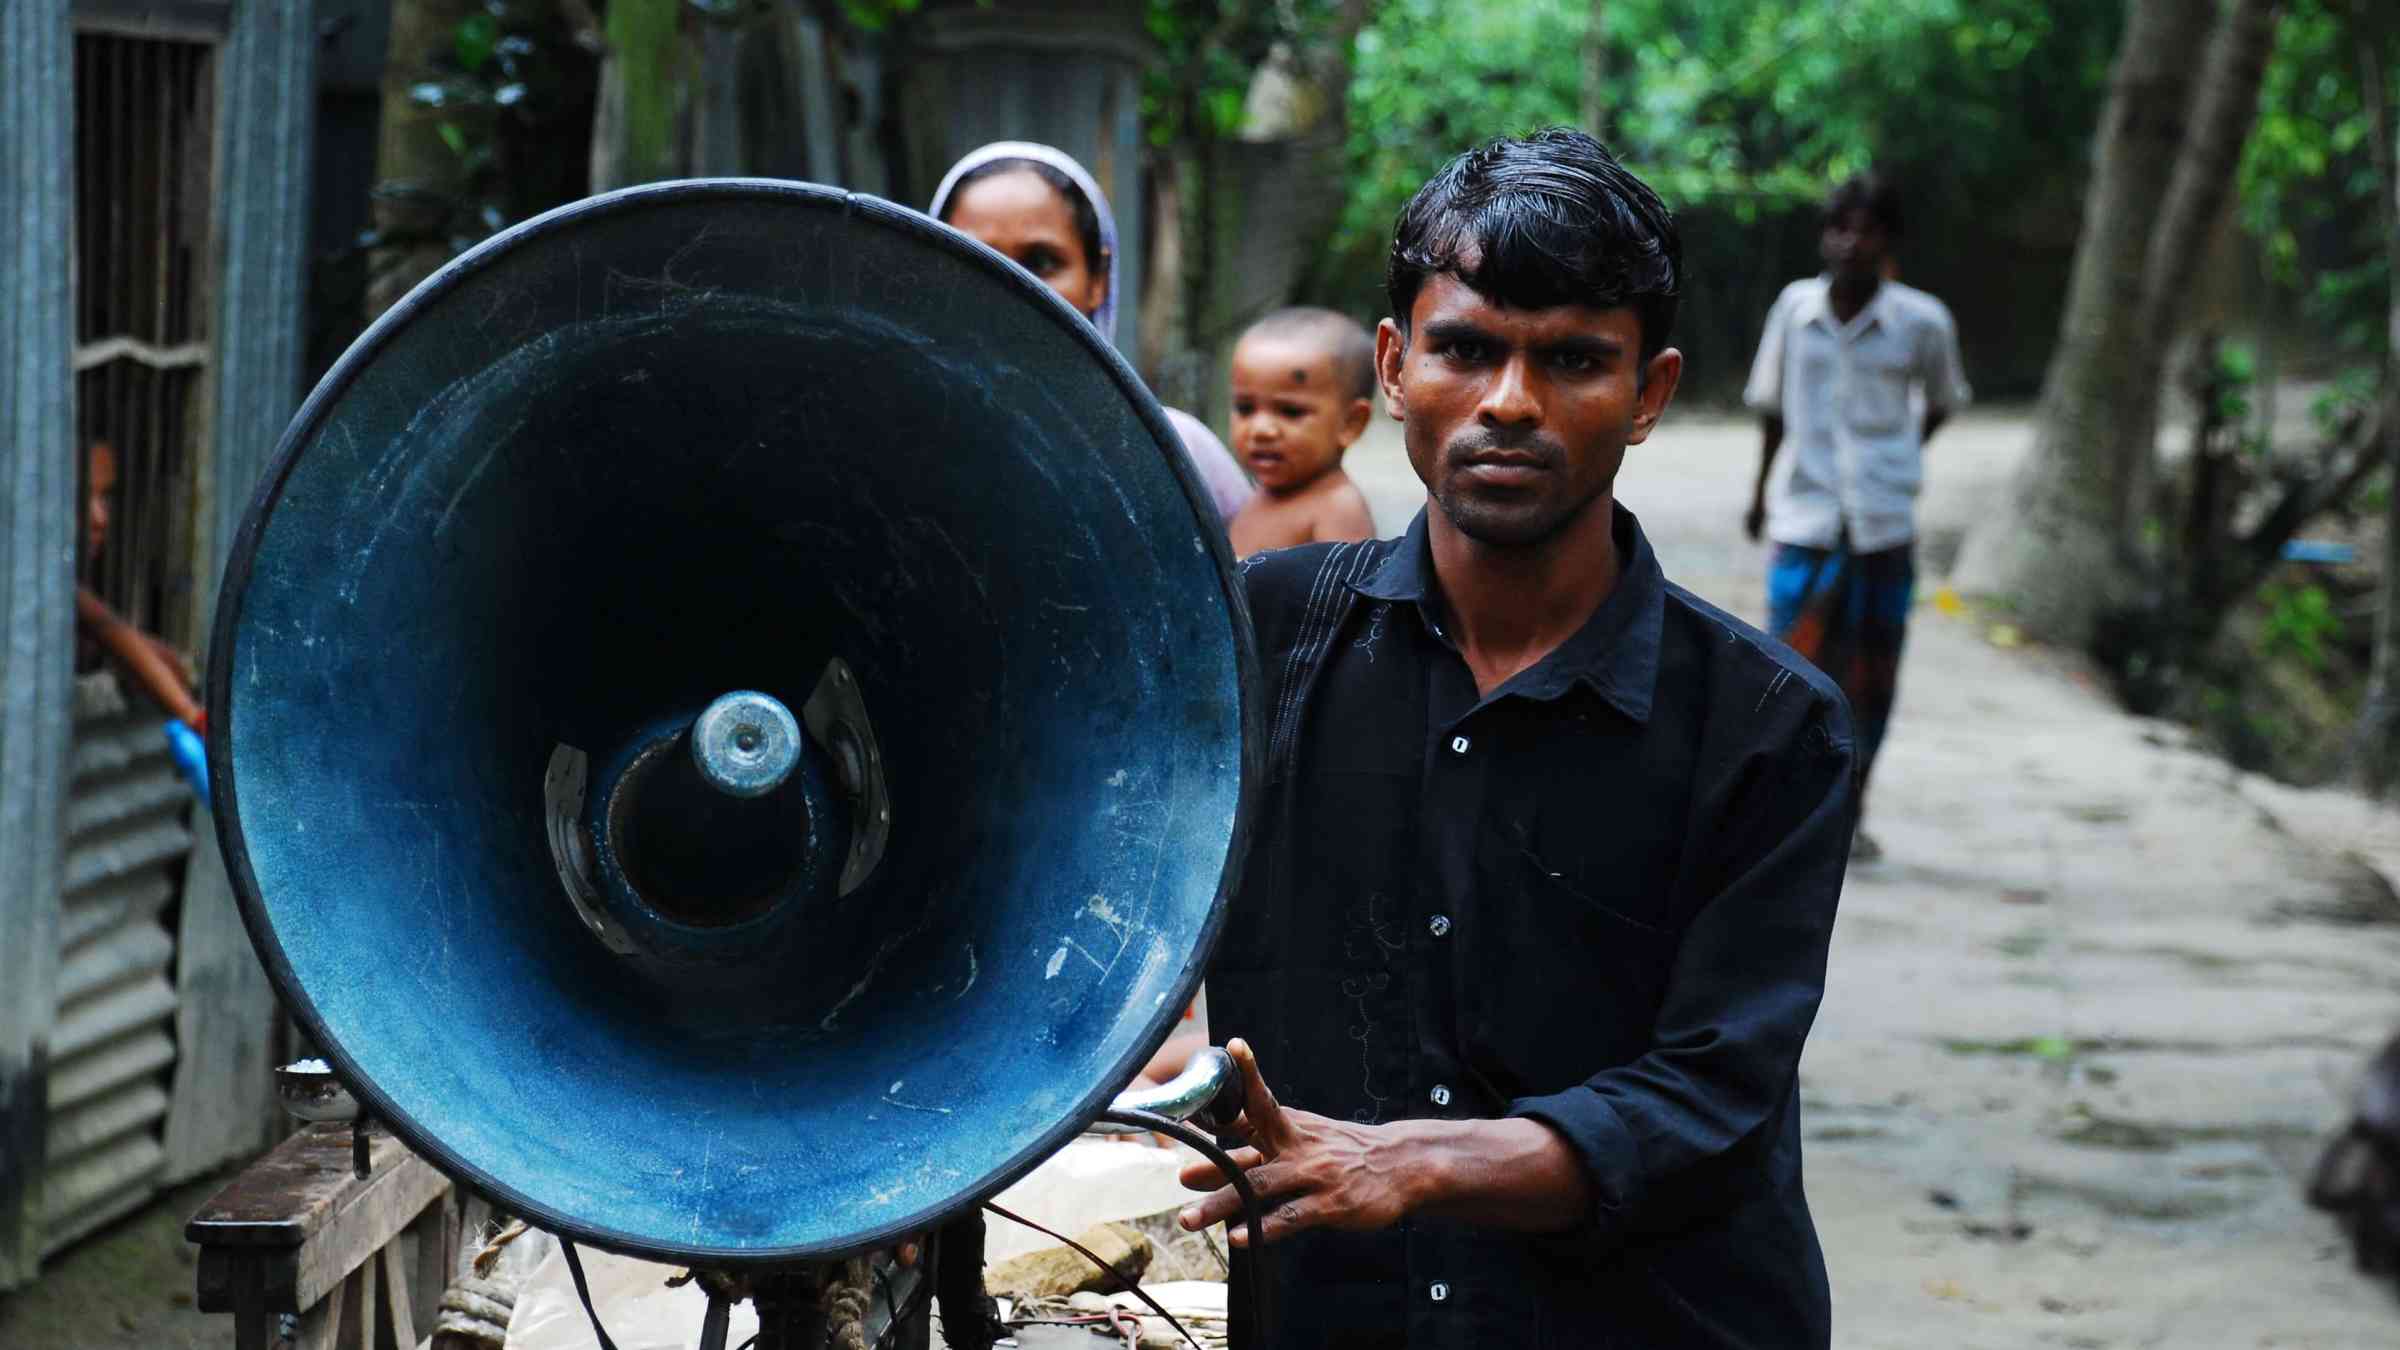 Man carrying a speaker